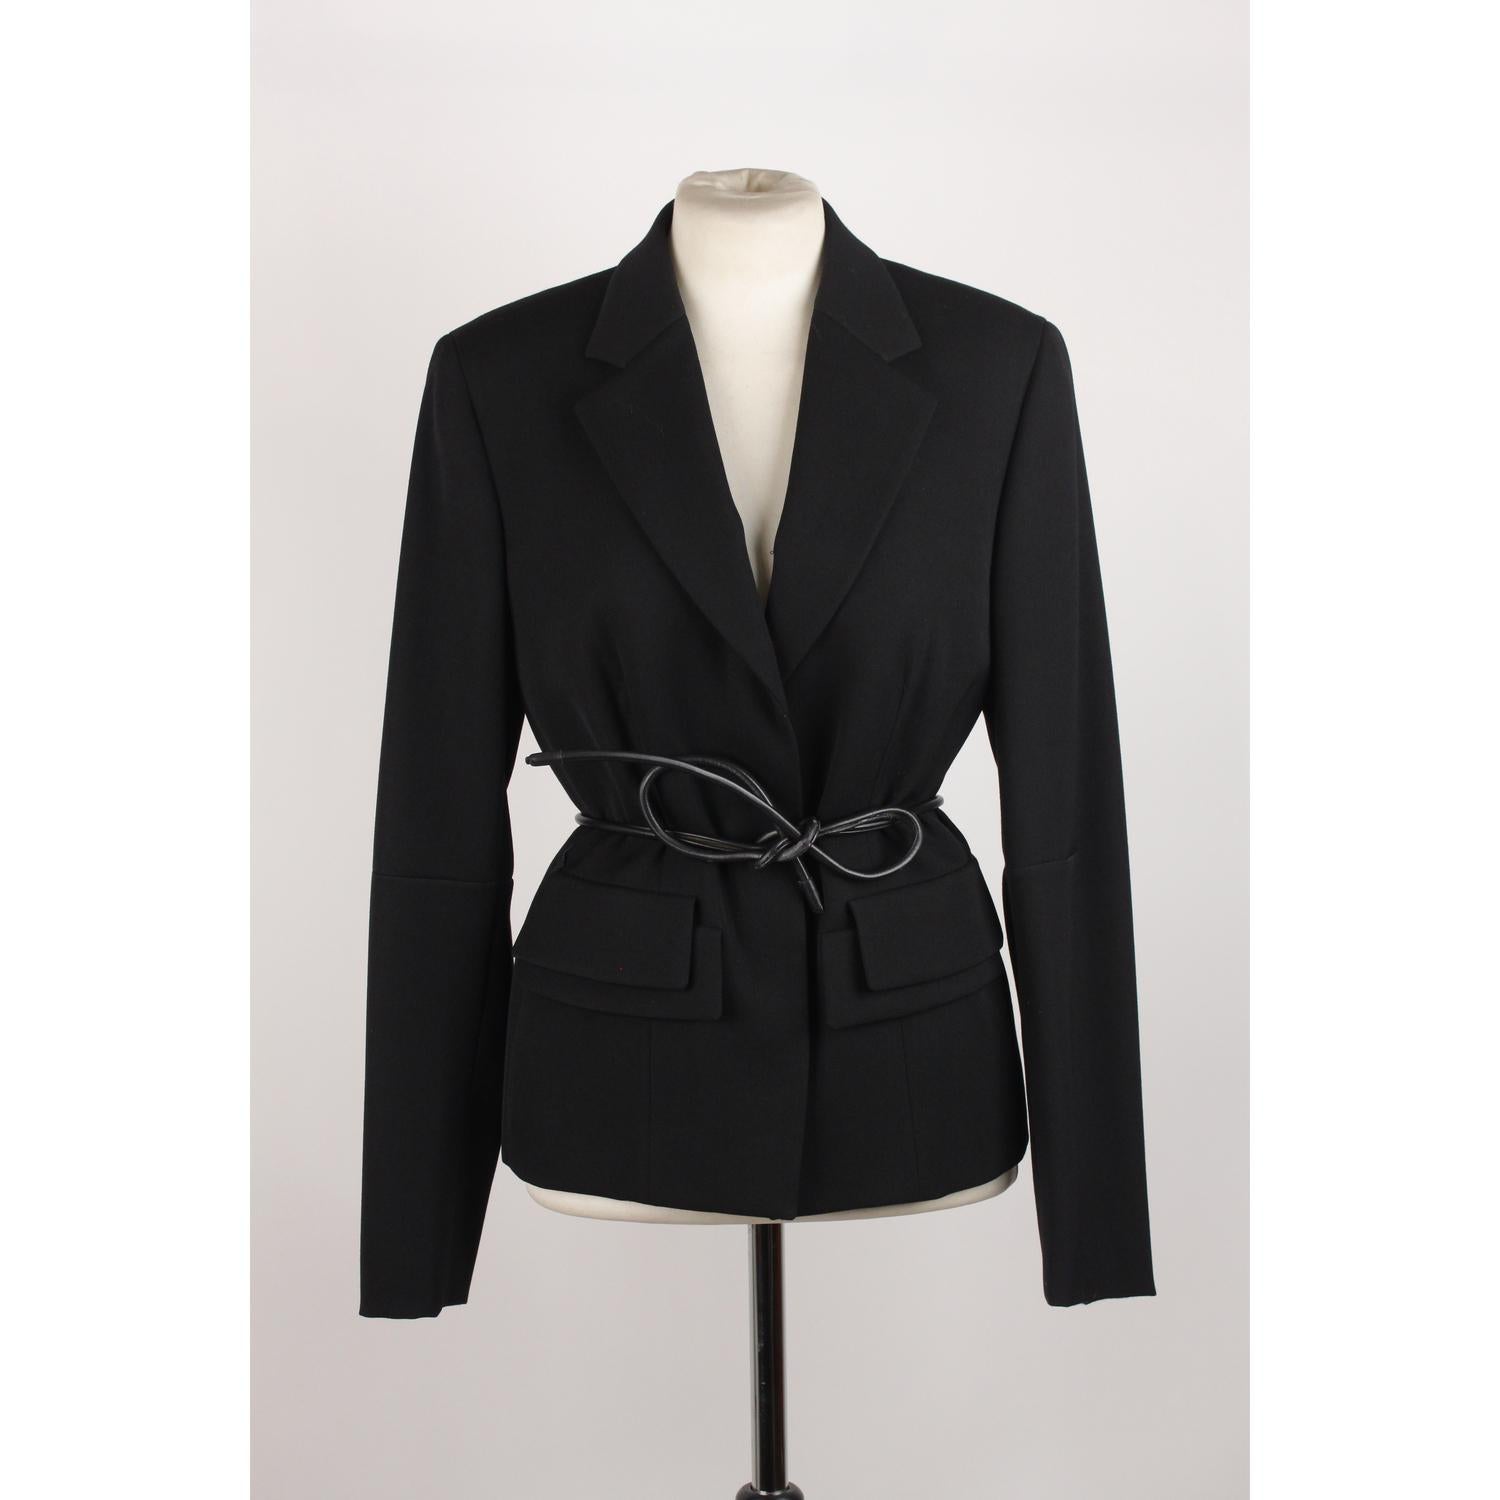 Single breasted wool blazer by GUCCI from the Tom Ford era. Black color.  Self-tie leather belt. Viscose lining. Button closure. Viscose lining and inner pockets. Size 42 IT (The size shown for this item is the size indicated by the designer on the